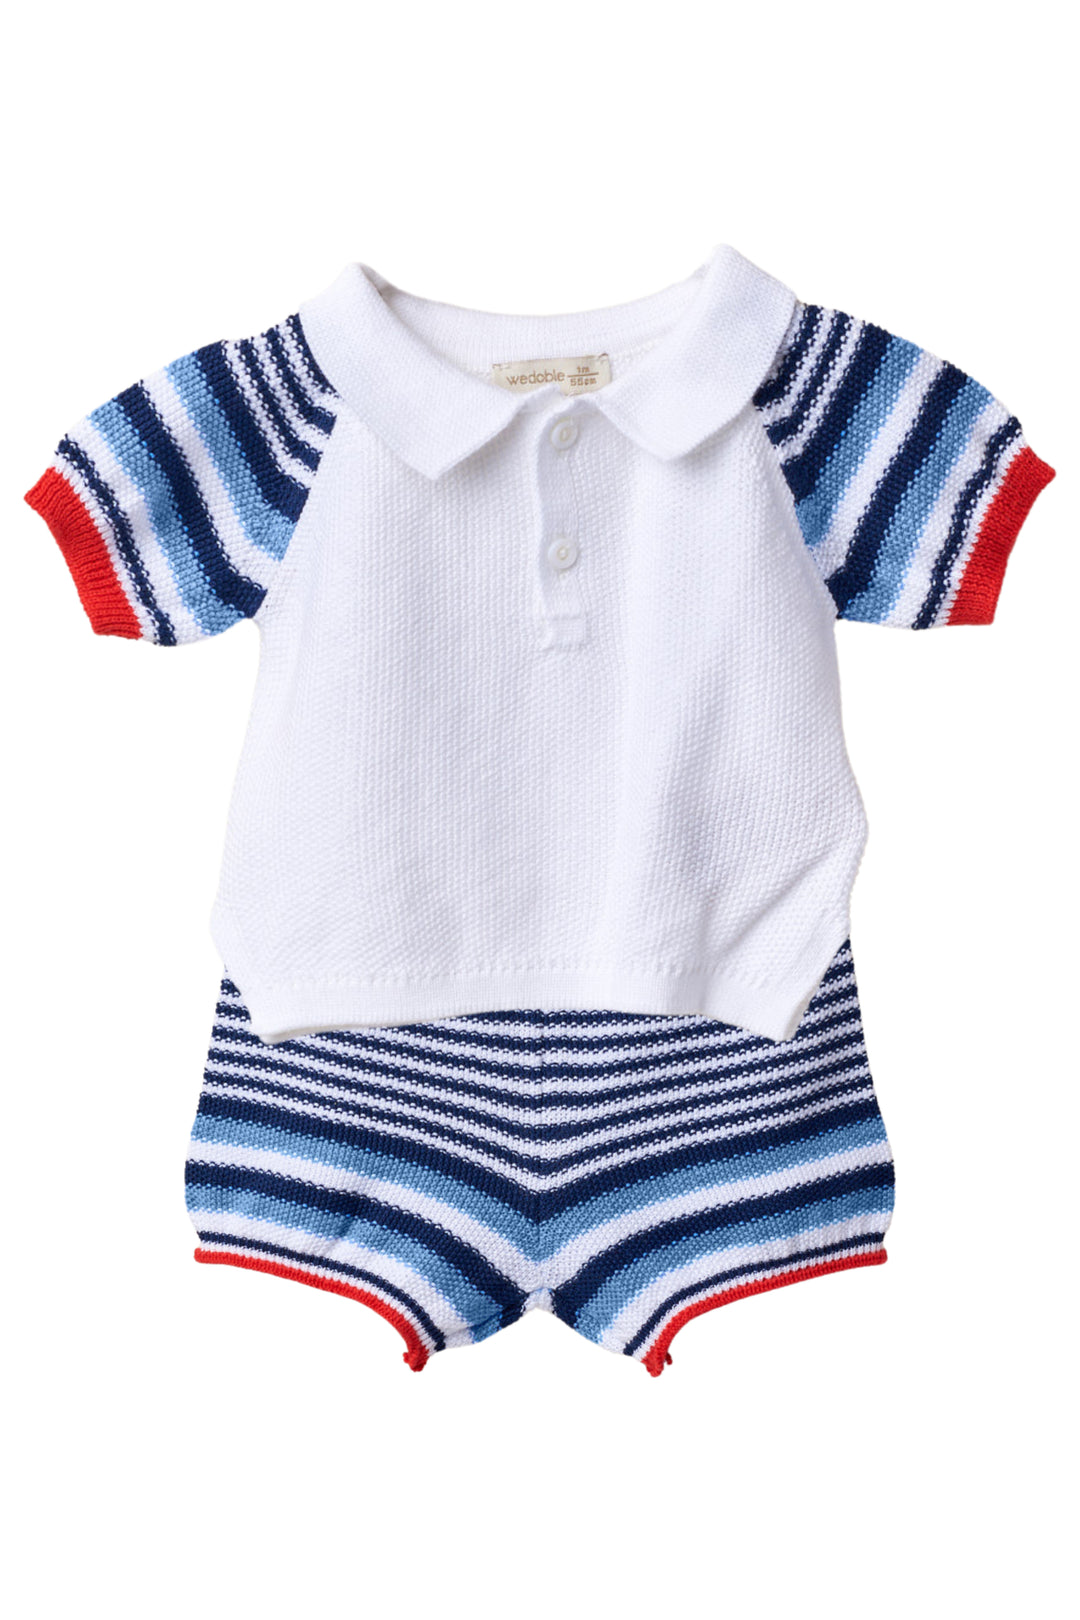 Wedoble "Leo" Navy Striped Knitted Polo Shirt & Shorts | Millie and John